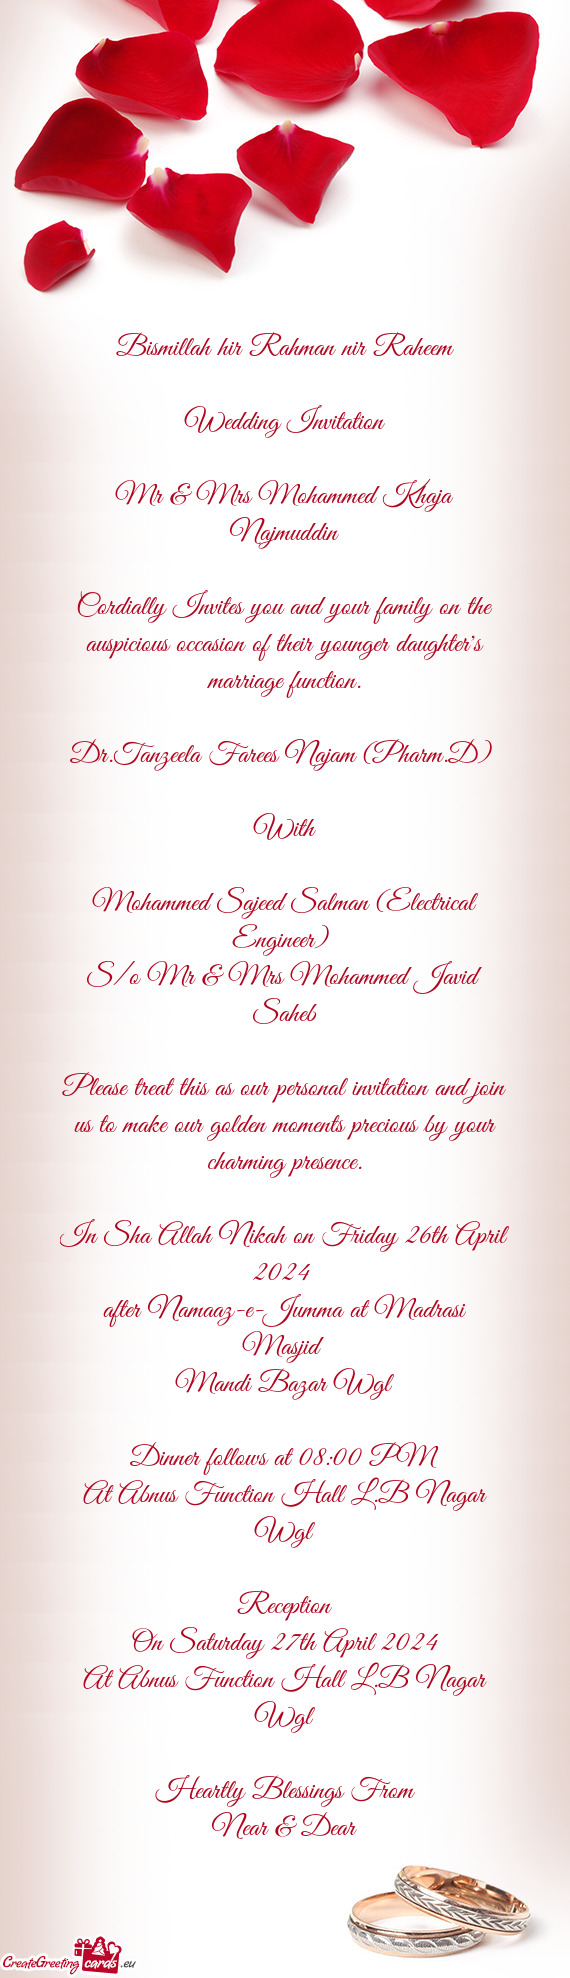 Cordially Invites you and your family on the auspicious occasion of their younger daughter's marriag